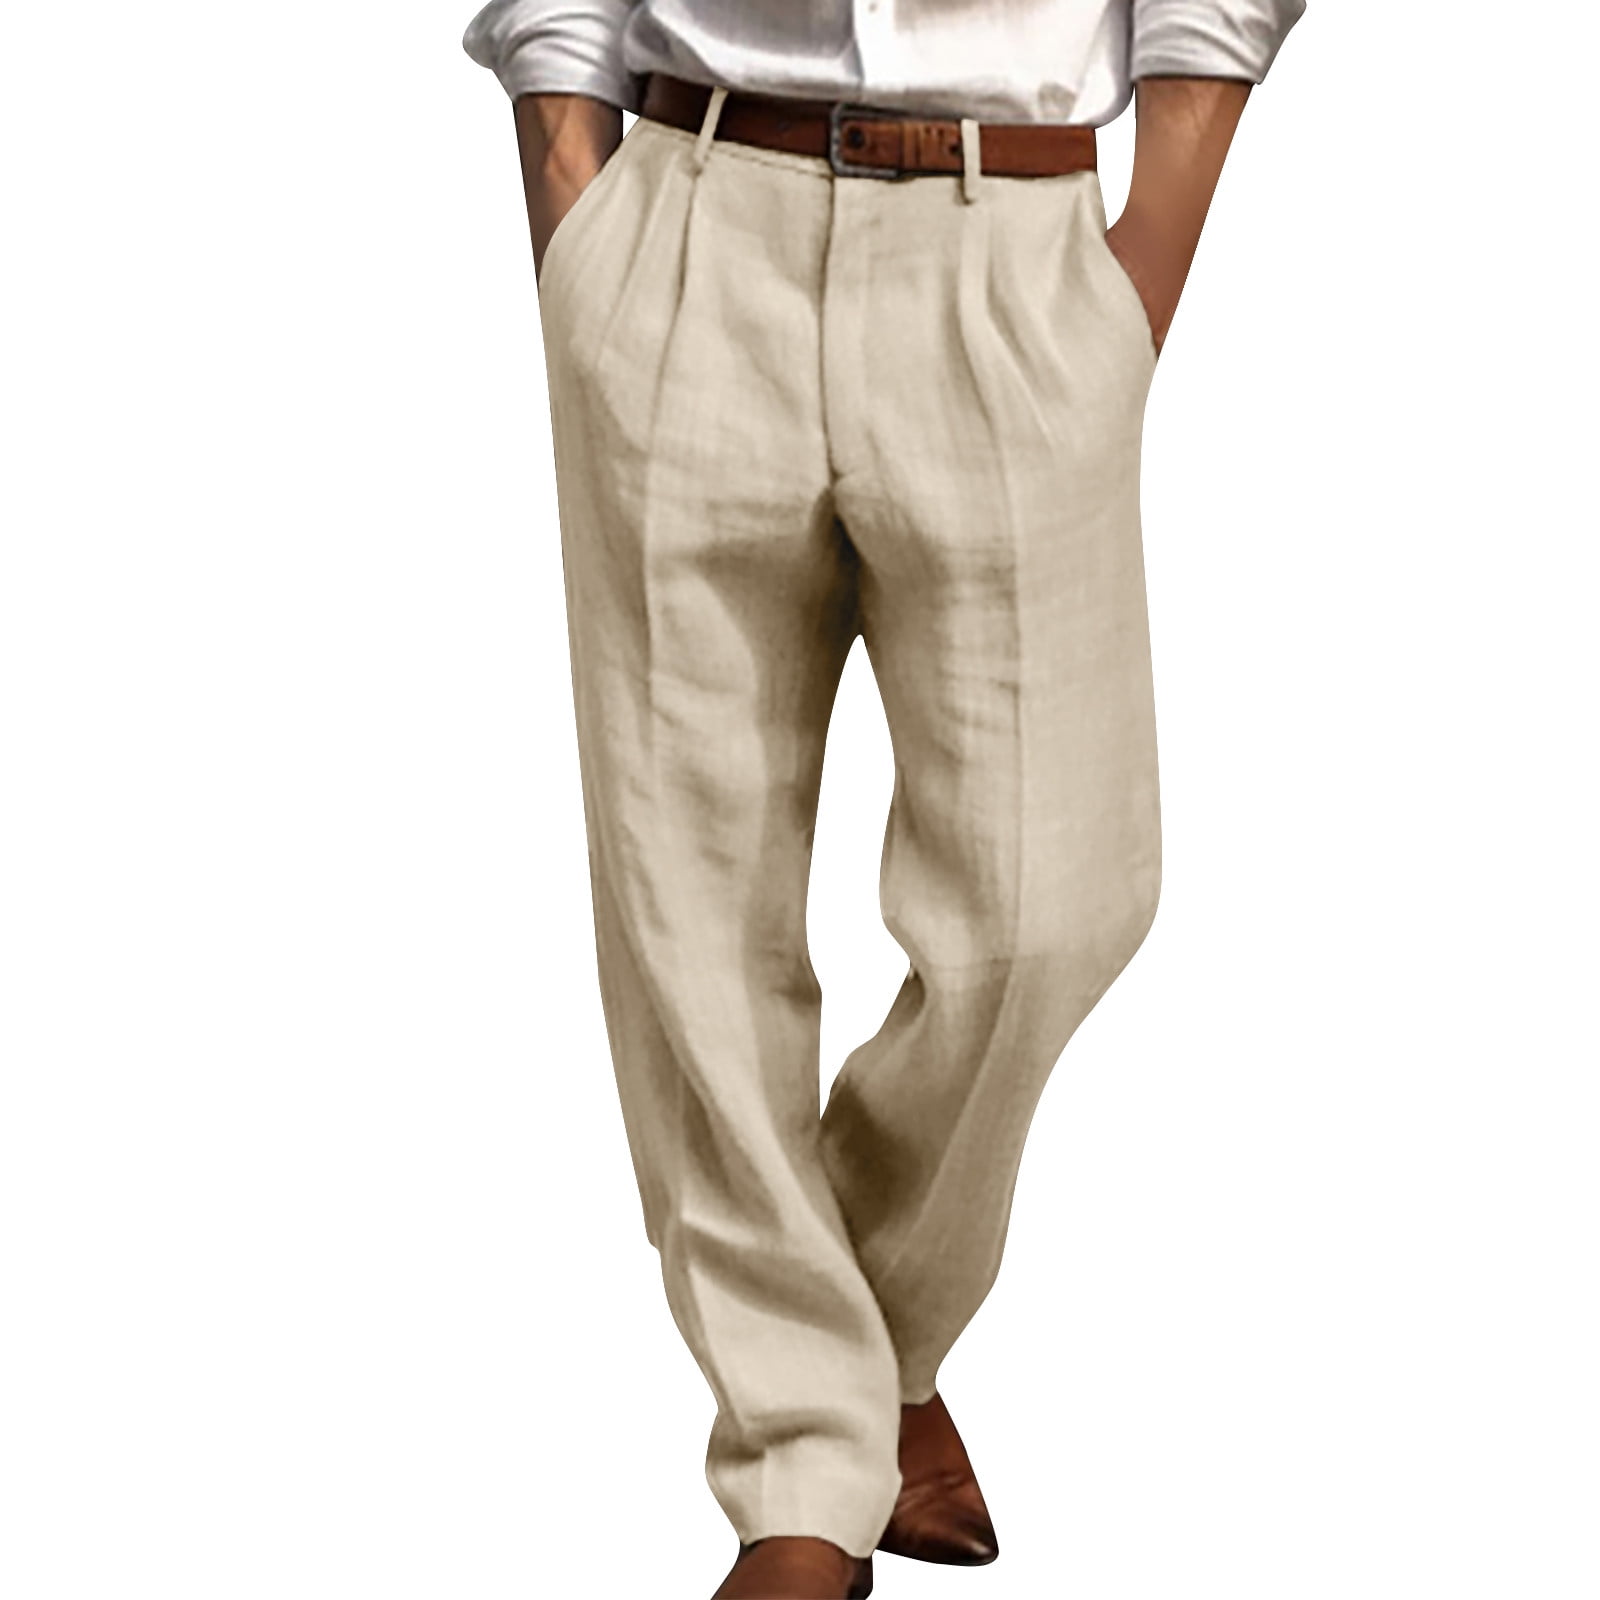 YanHoo Mens Chino Pants Classic Fit Casual Flat Pleated Business Dress ...